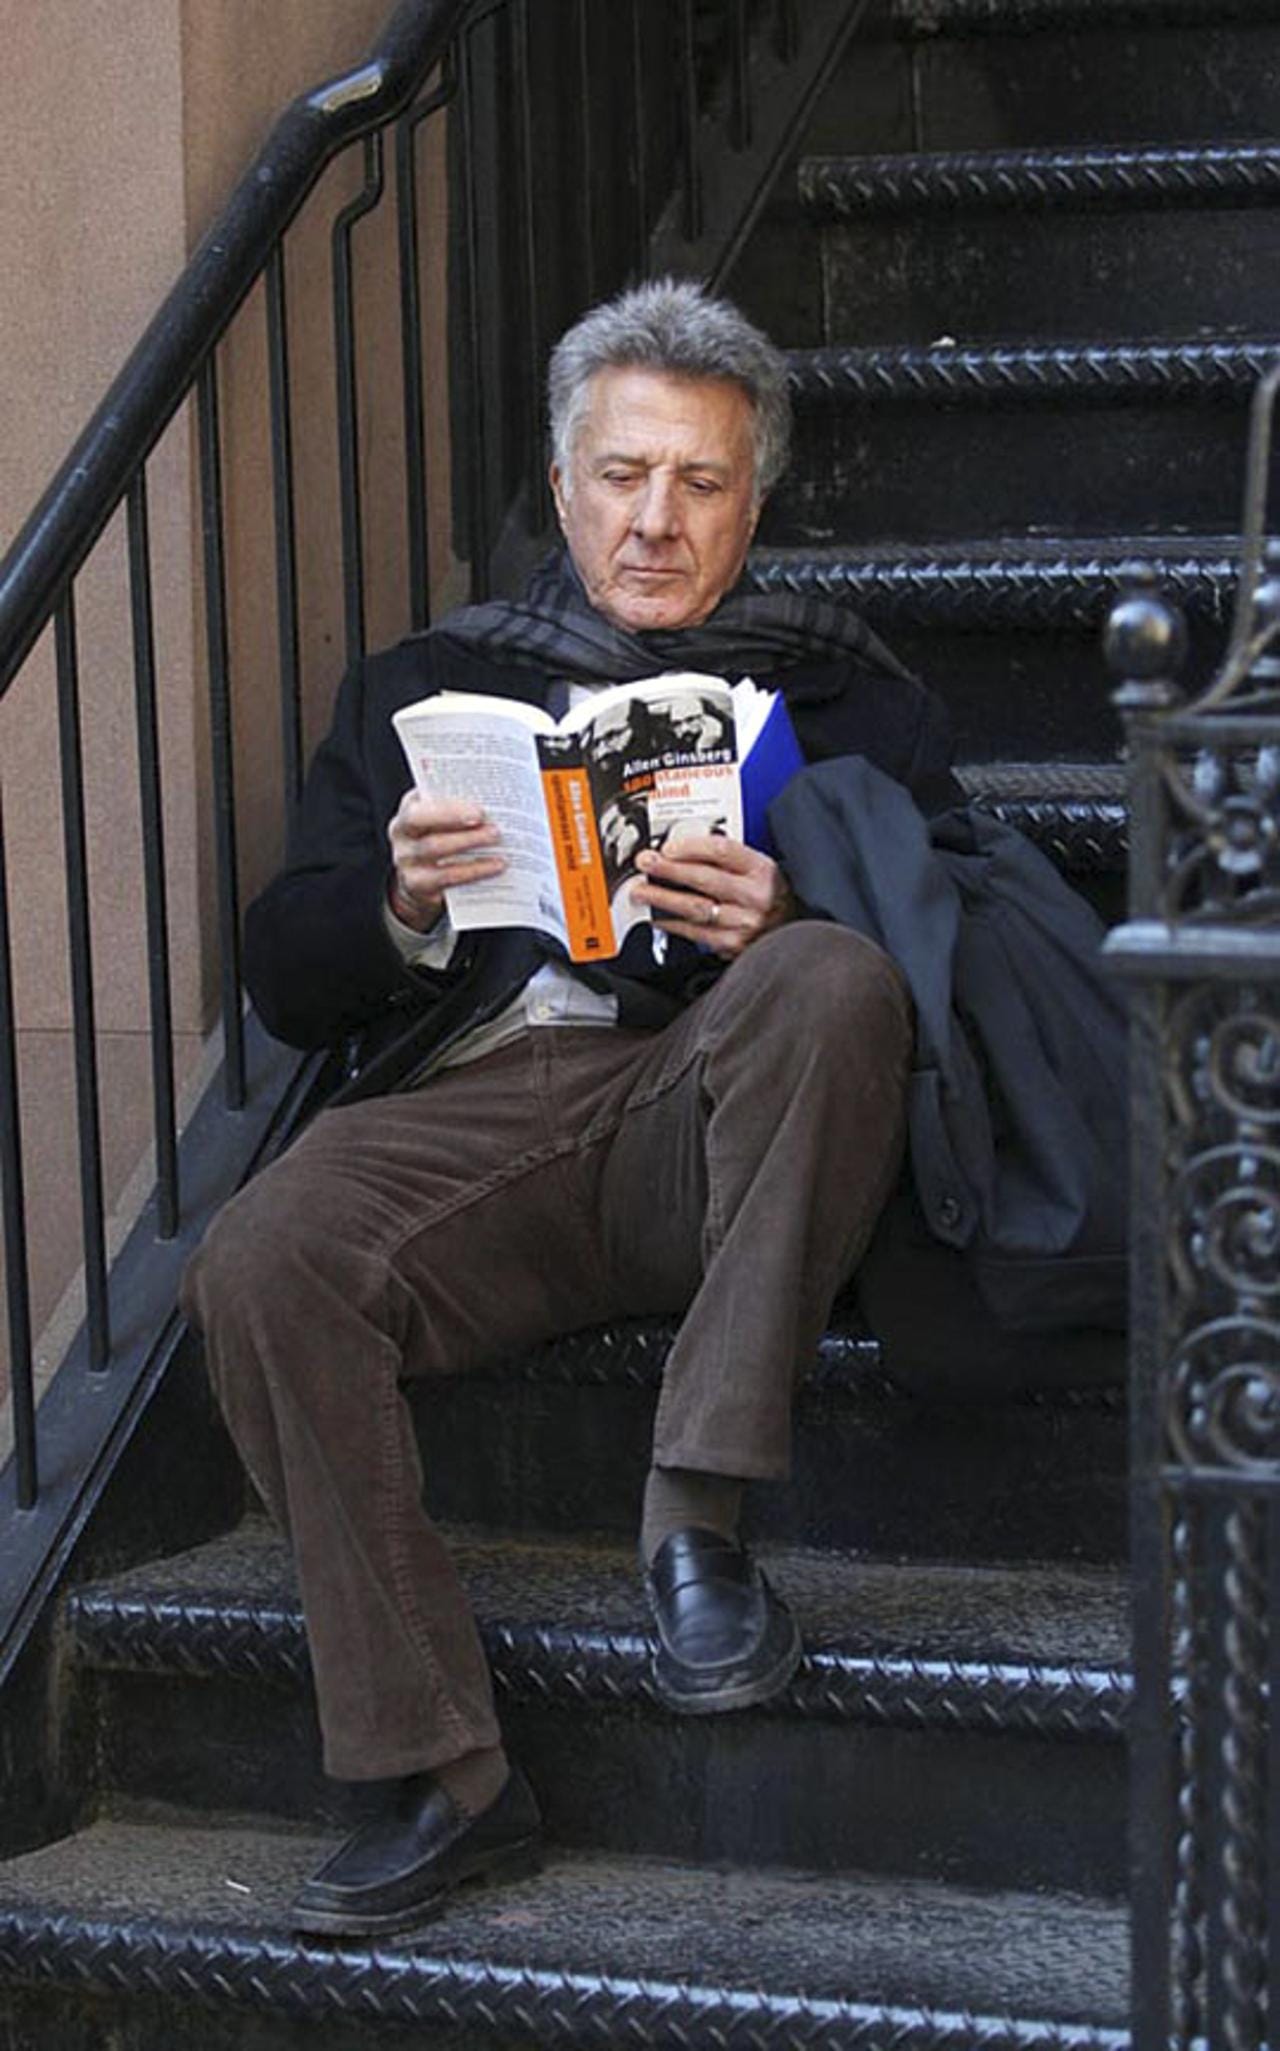 Dustin Hoffman poses with a book of Allen Ginsberg's essays, "Spontaneous Mind."